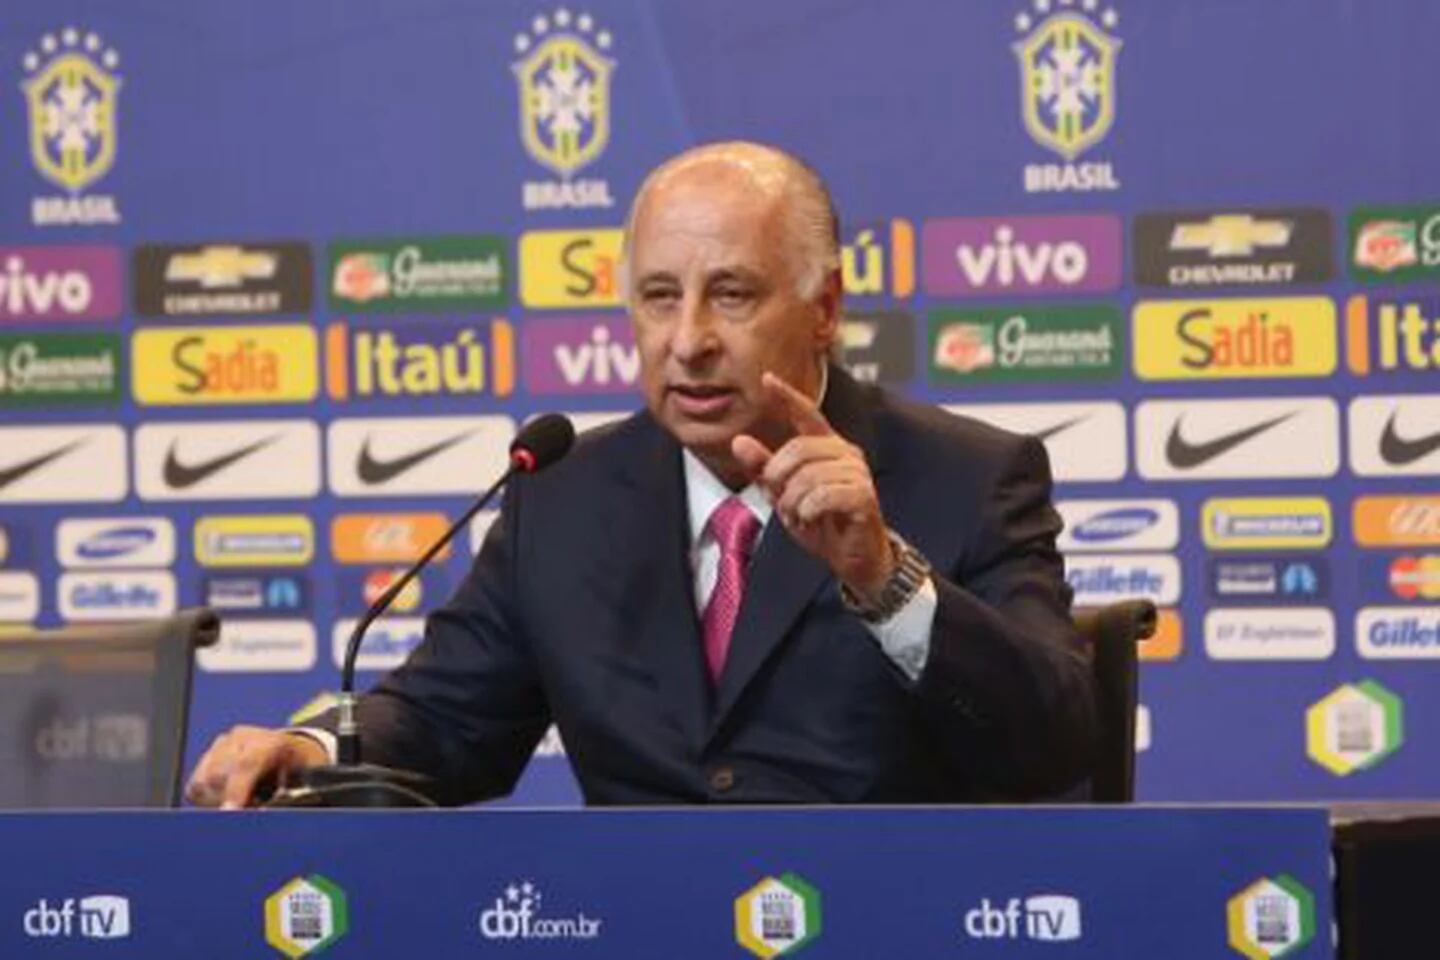 Head of Brazil's soccer confederation suspended by ethics commission